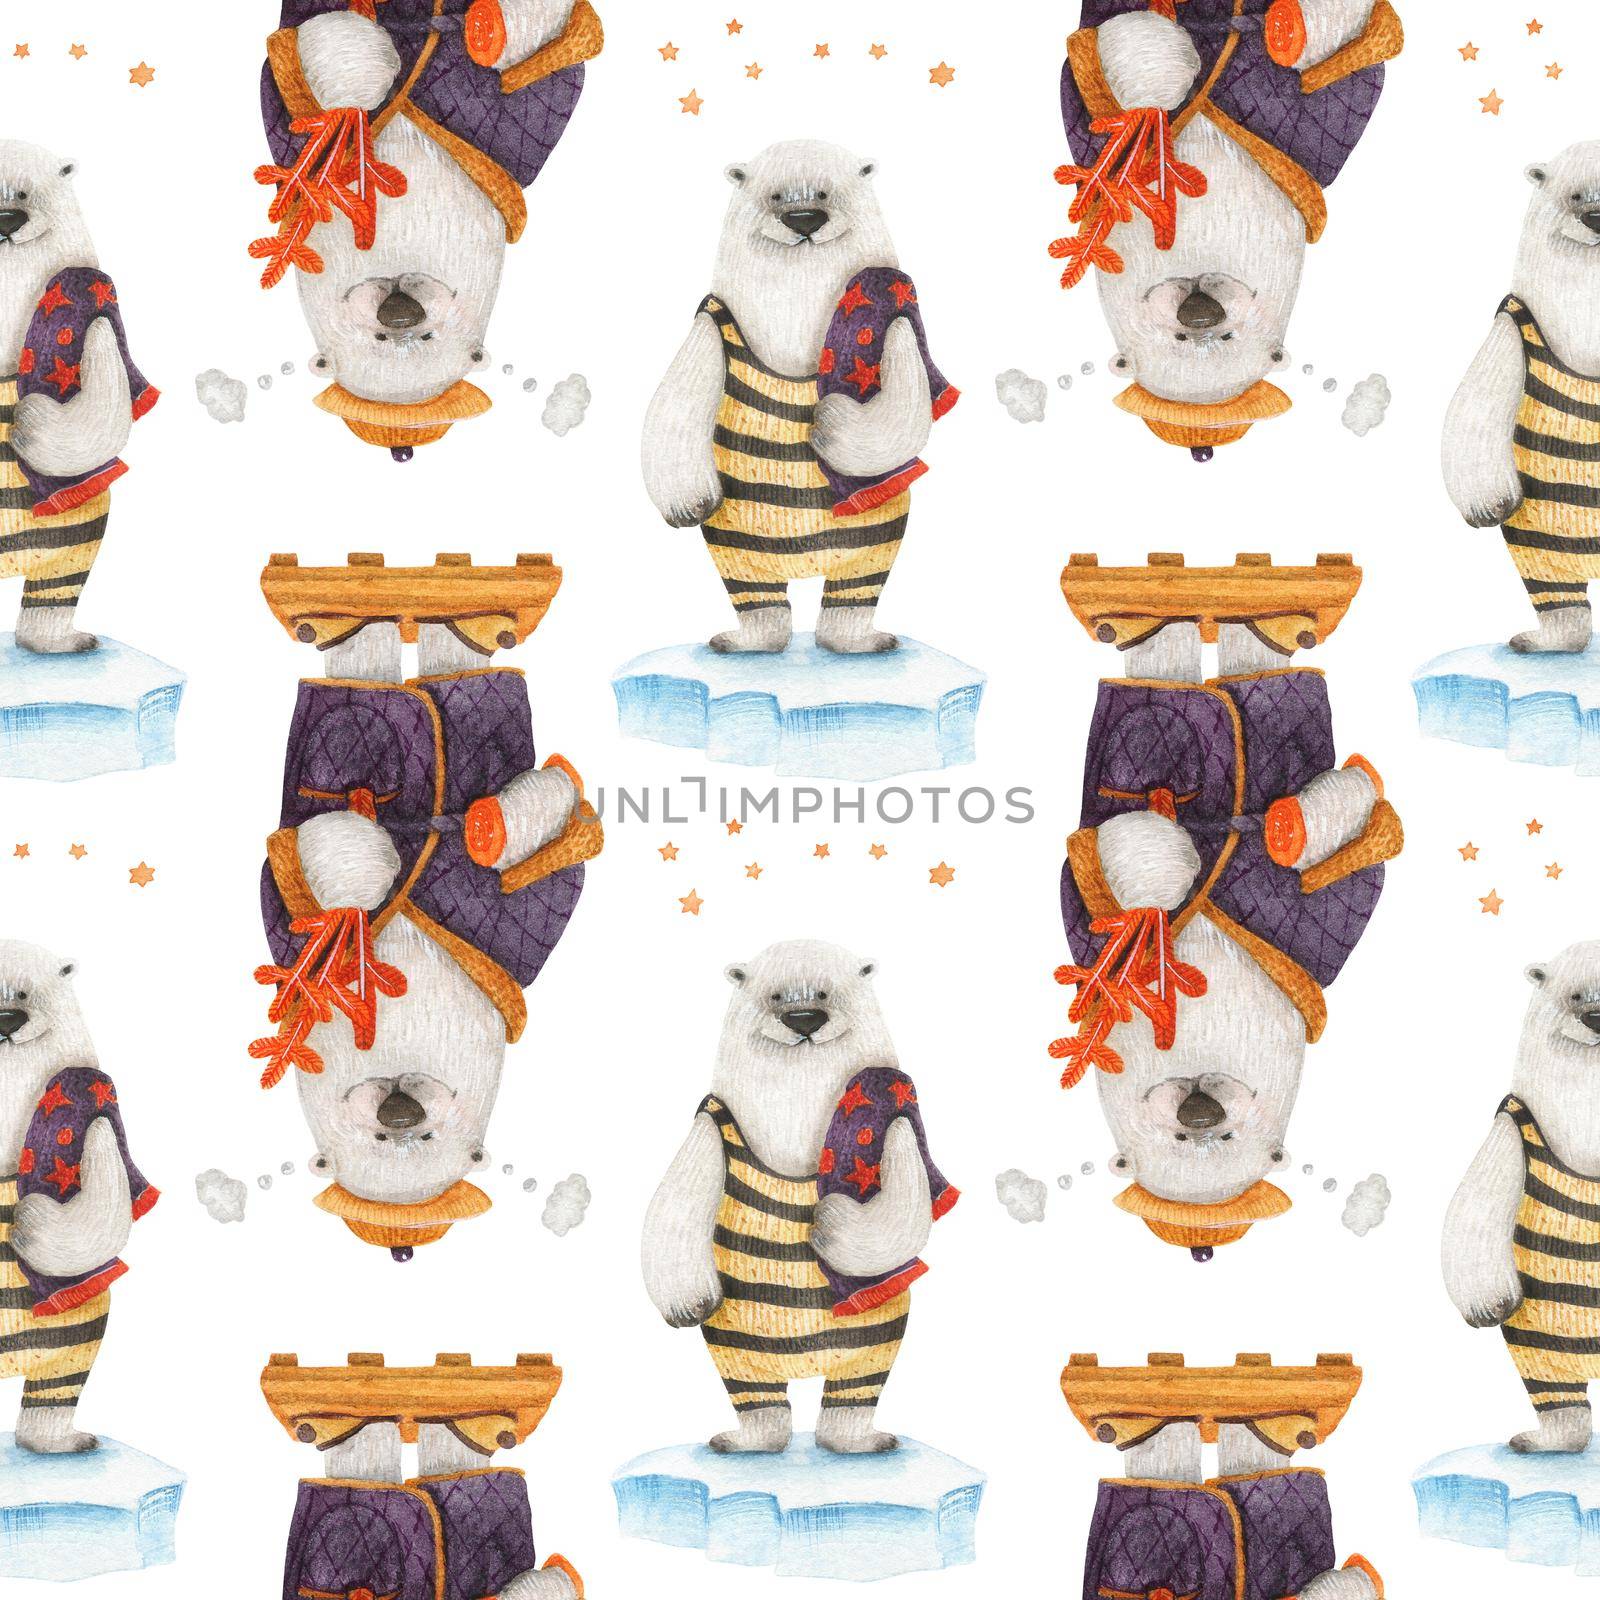 Polar bear healthy lifestyle. Watercolor seamless pattern by Xeniasnowstorm